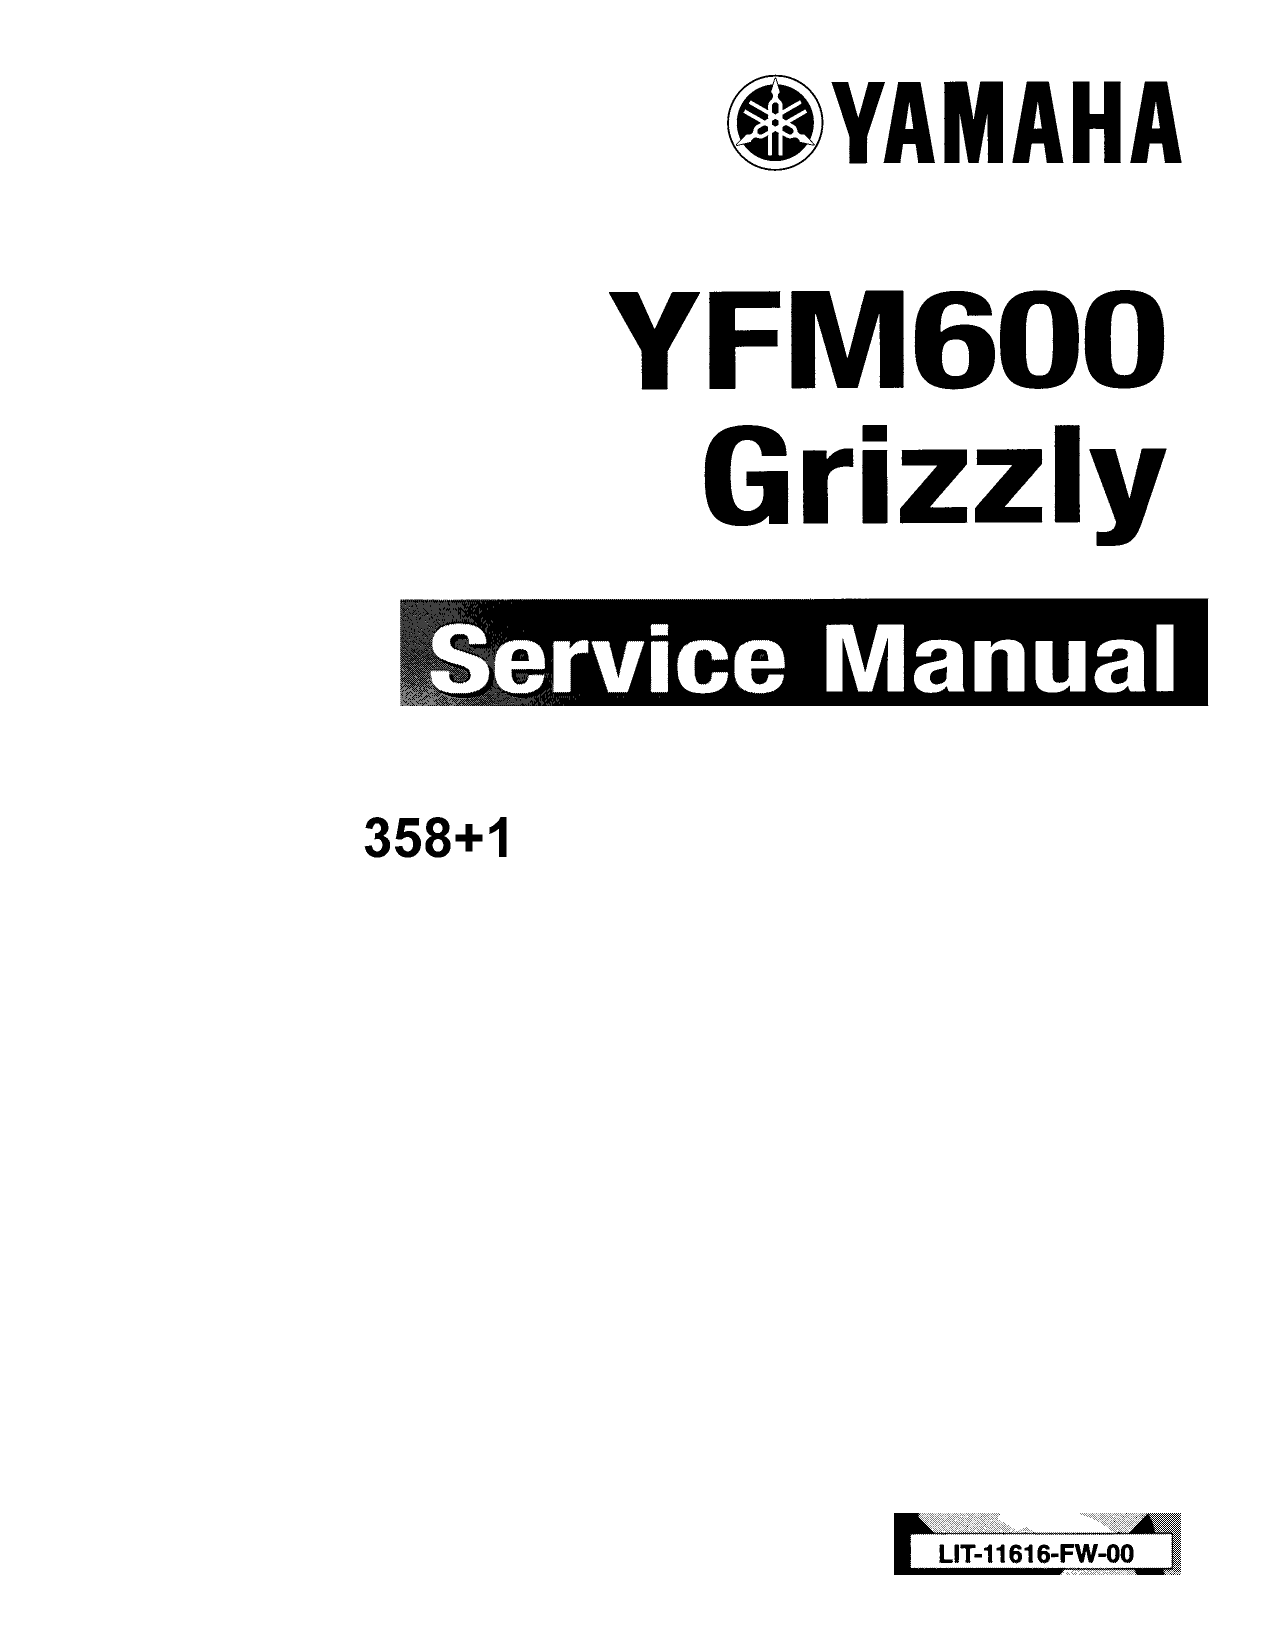 Yamaha Grizzly 660, YFM660 repair and service manual Preview image 3